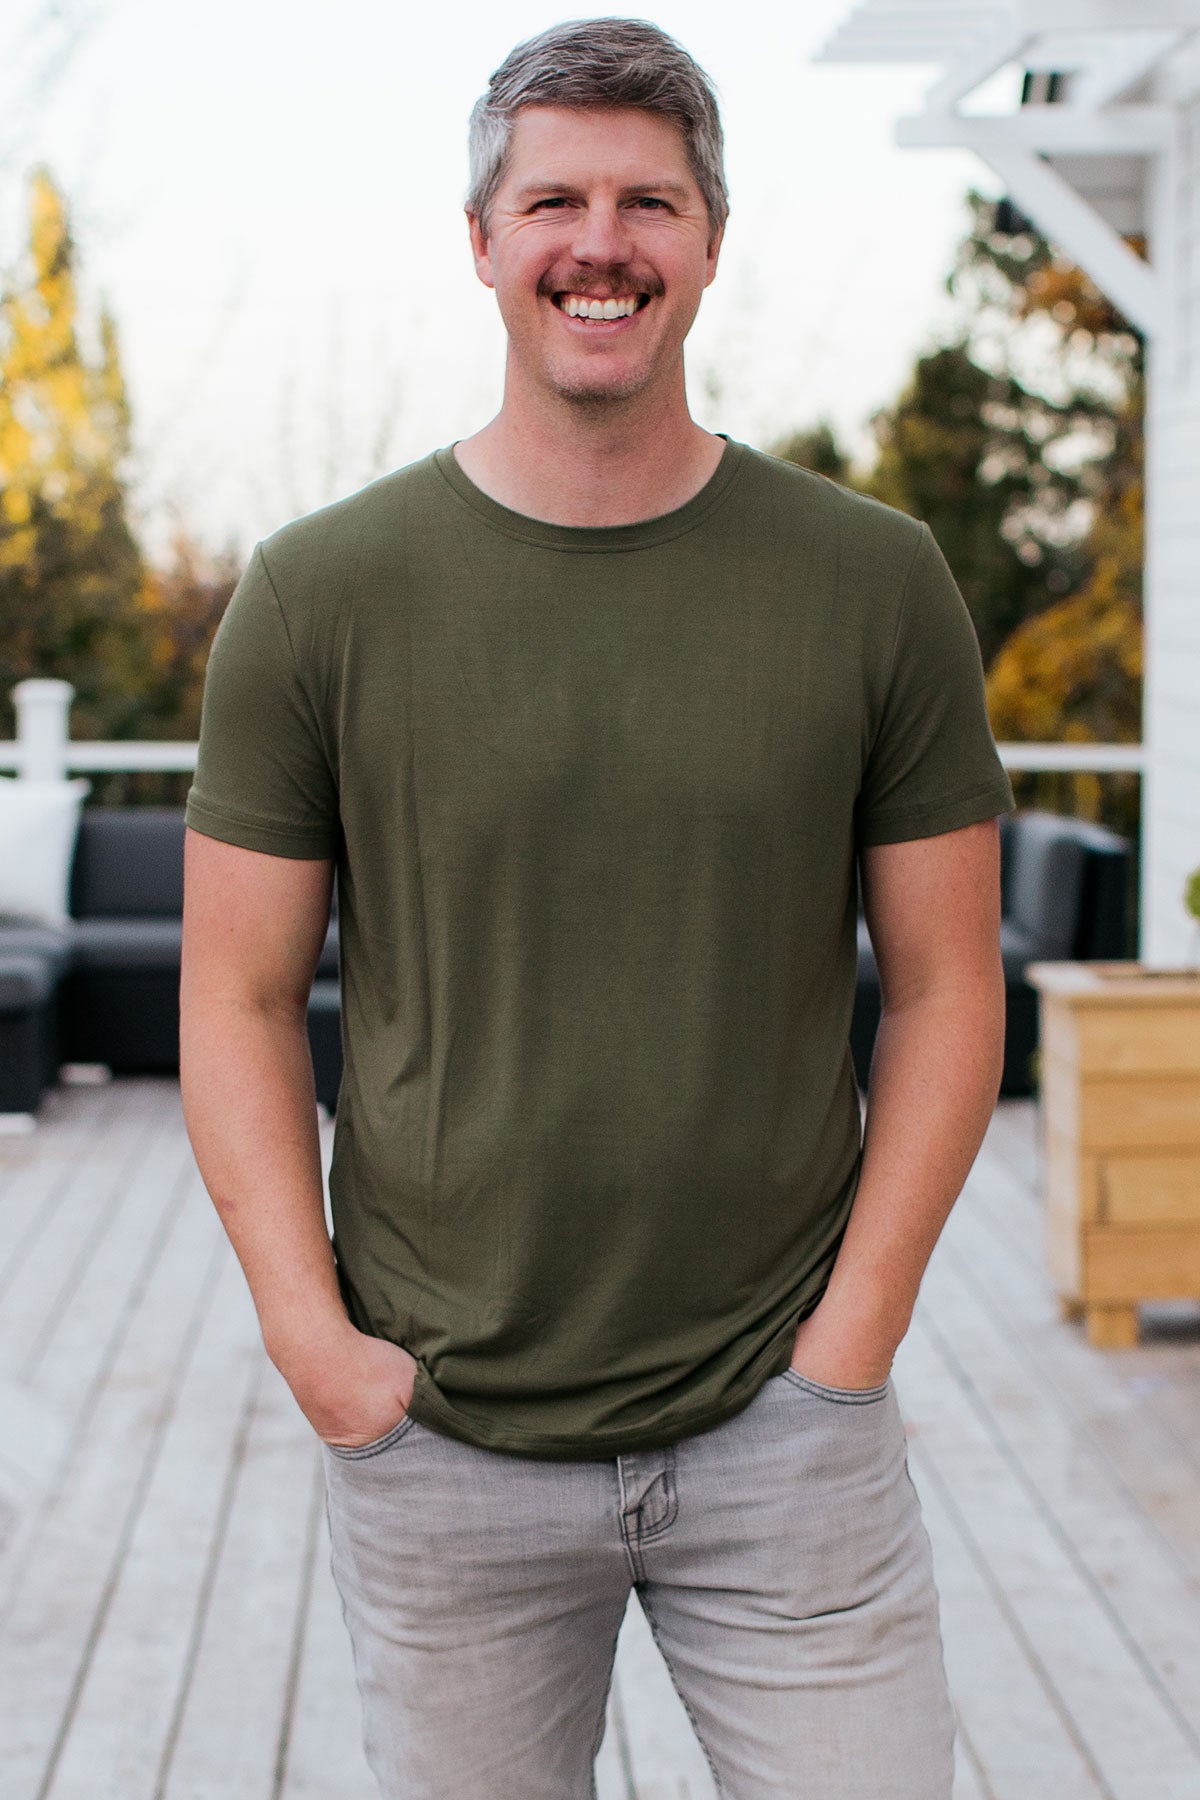 A man standing and smiling with both hands in his pockets, wearing Yala Nathan Men's Short Sleeve Bamboo Crew Tee Shirt in Moss